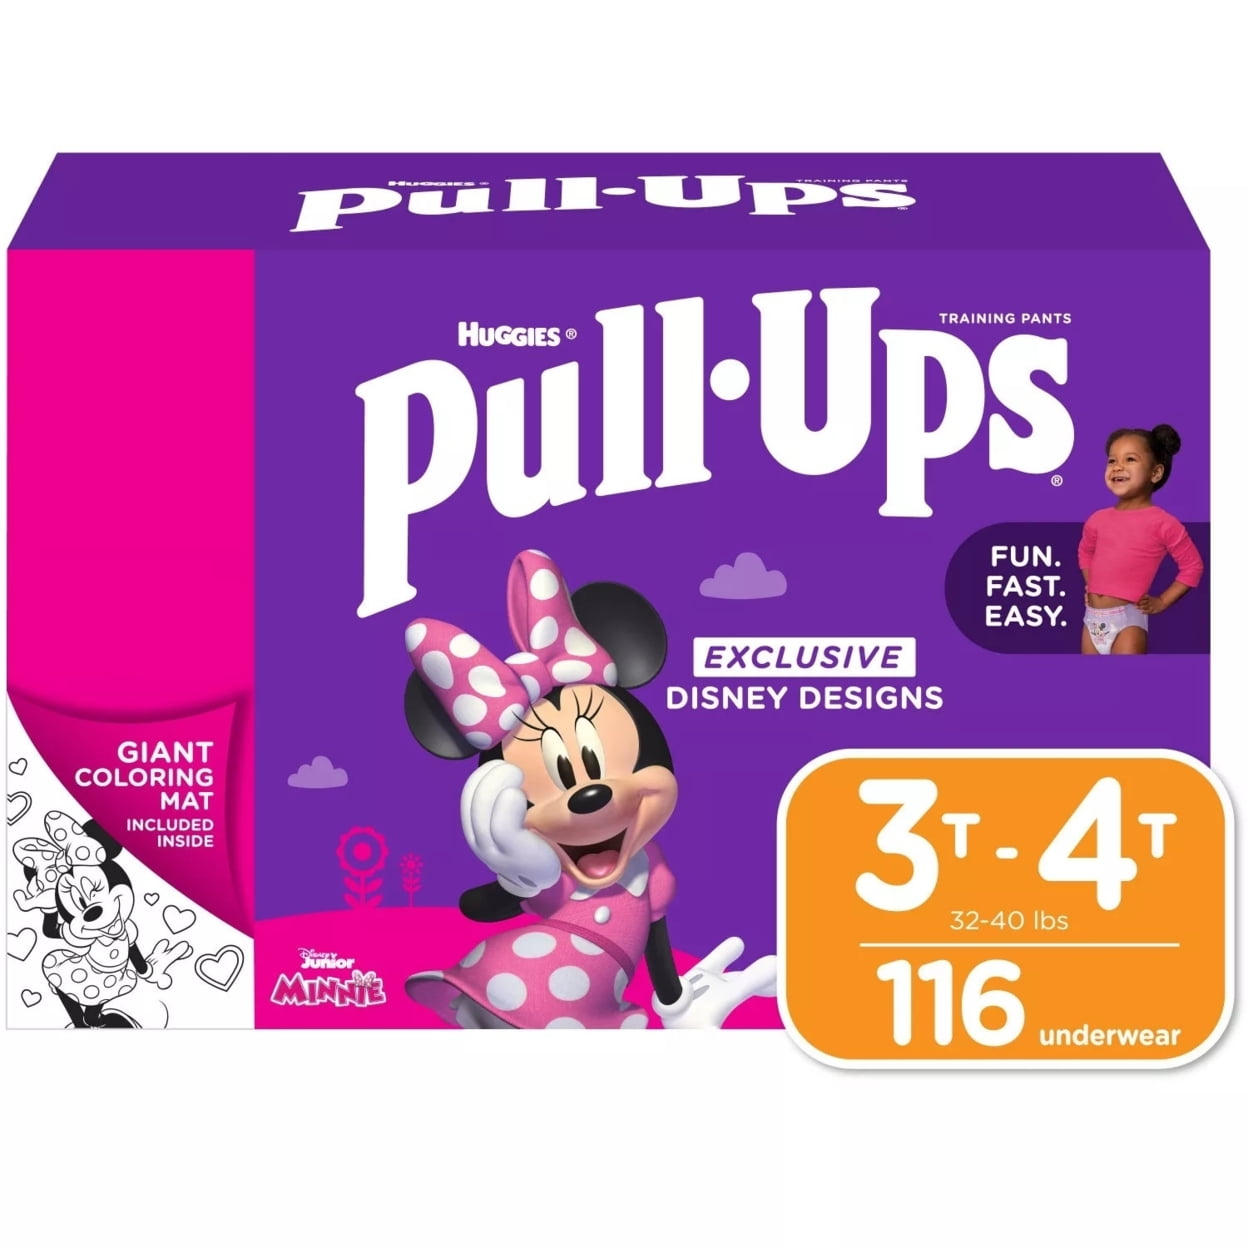 Huggies Pull-Ups Potty Training Pants for Girls 3T-4T 32-40 Pounds (116  Count) 